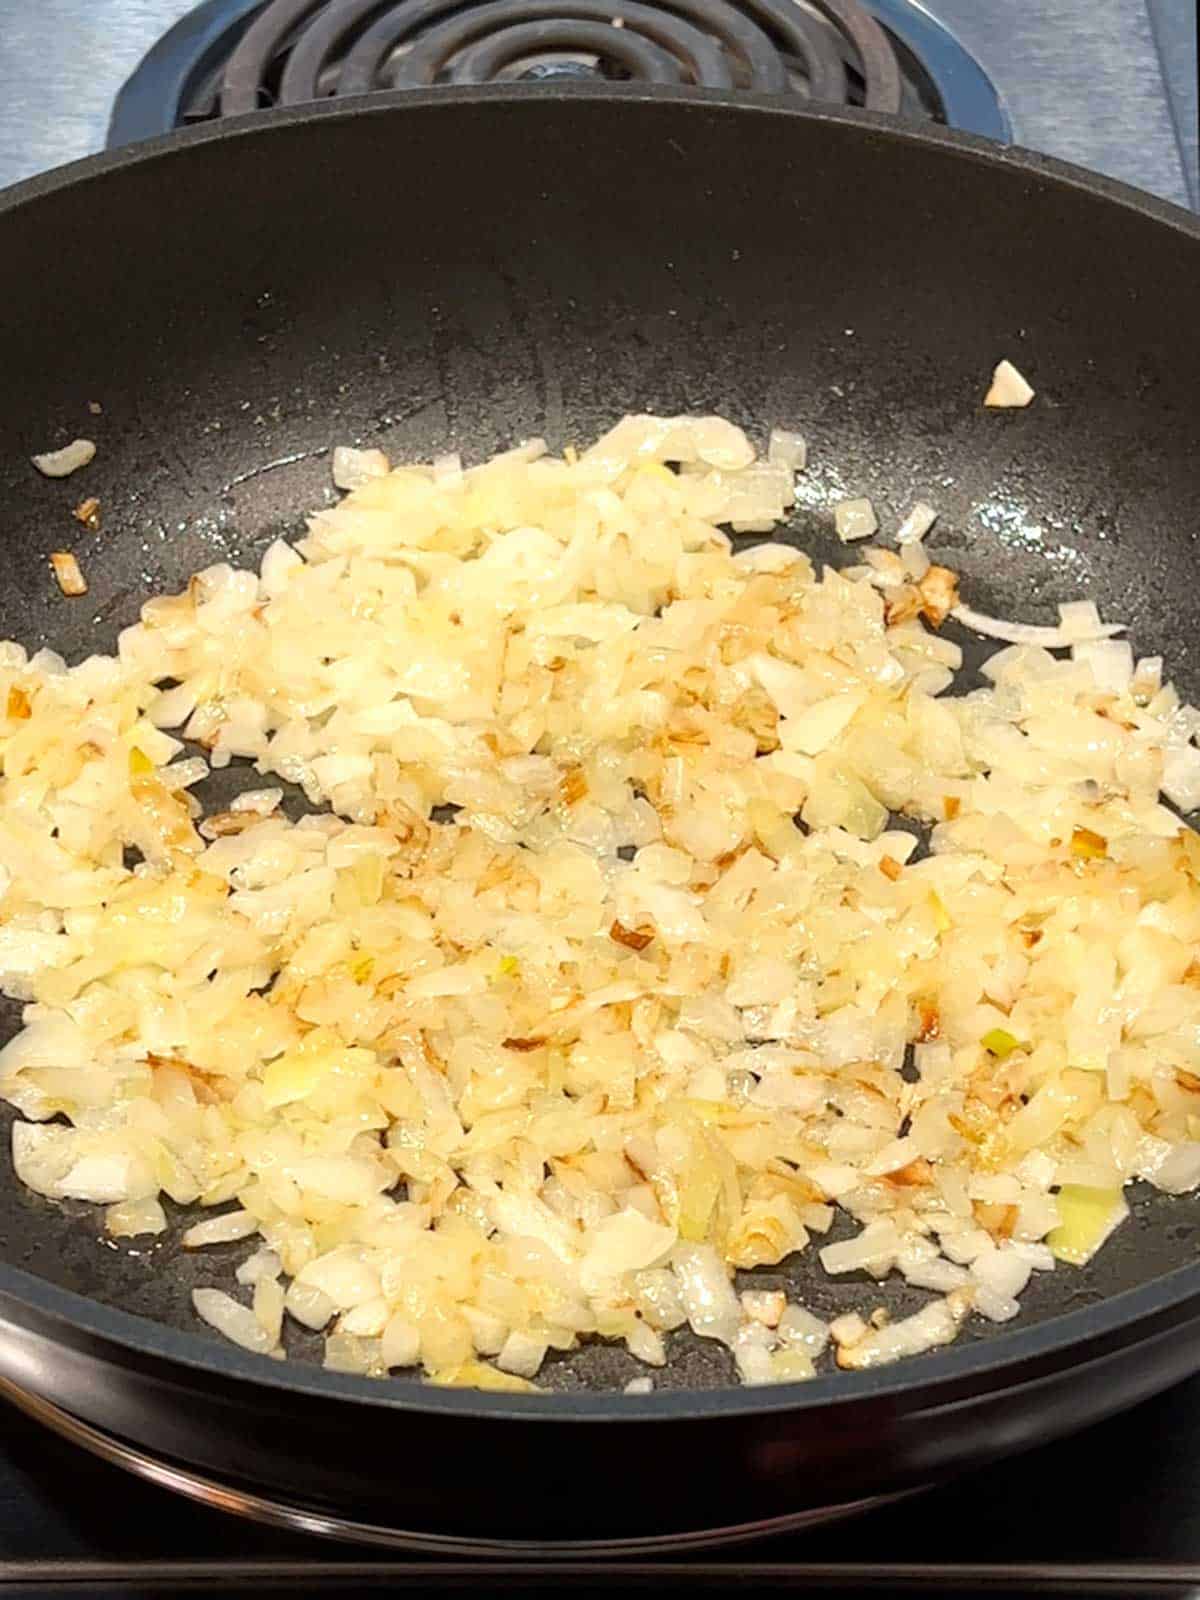 Cooking onions in skillet.